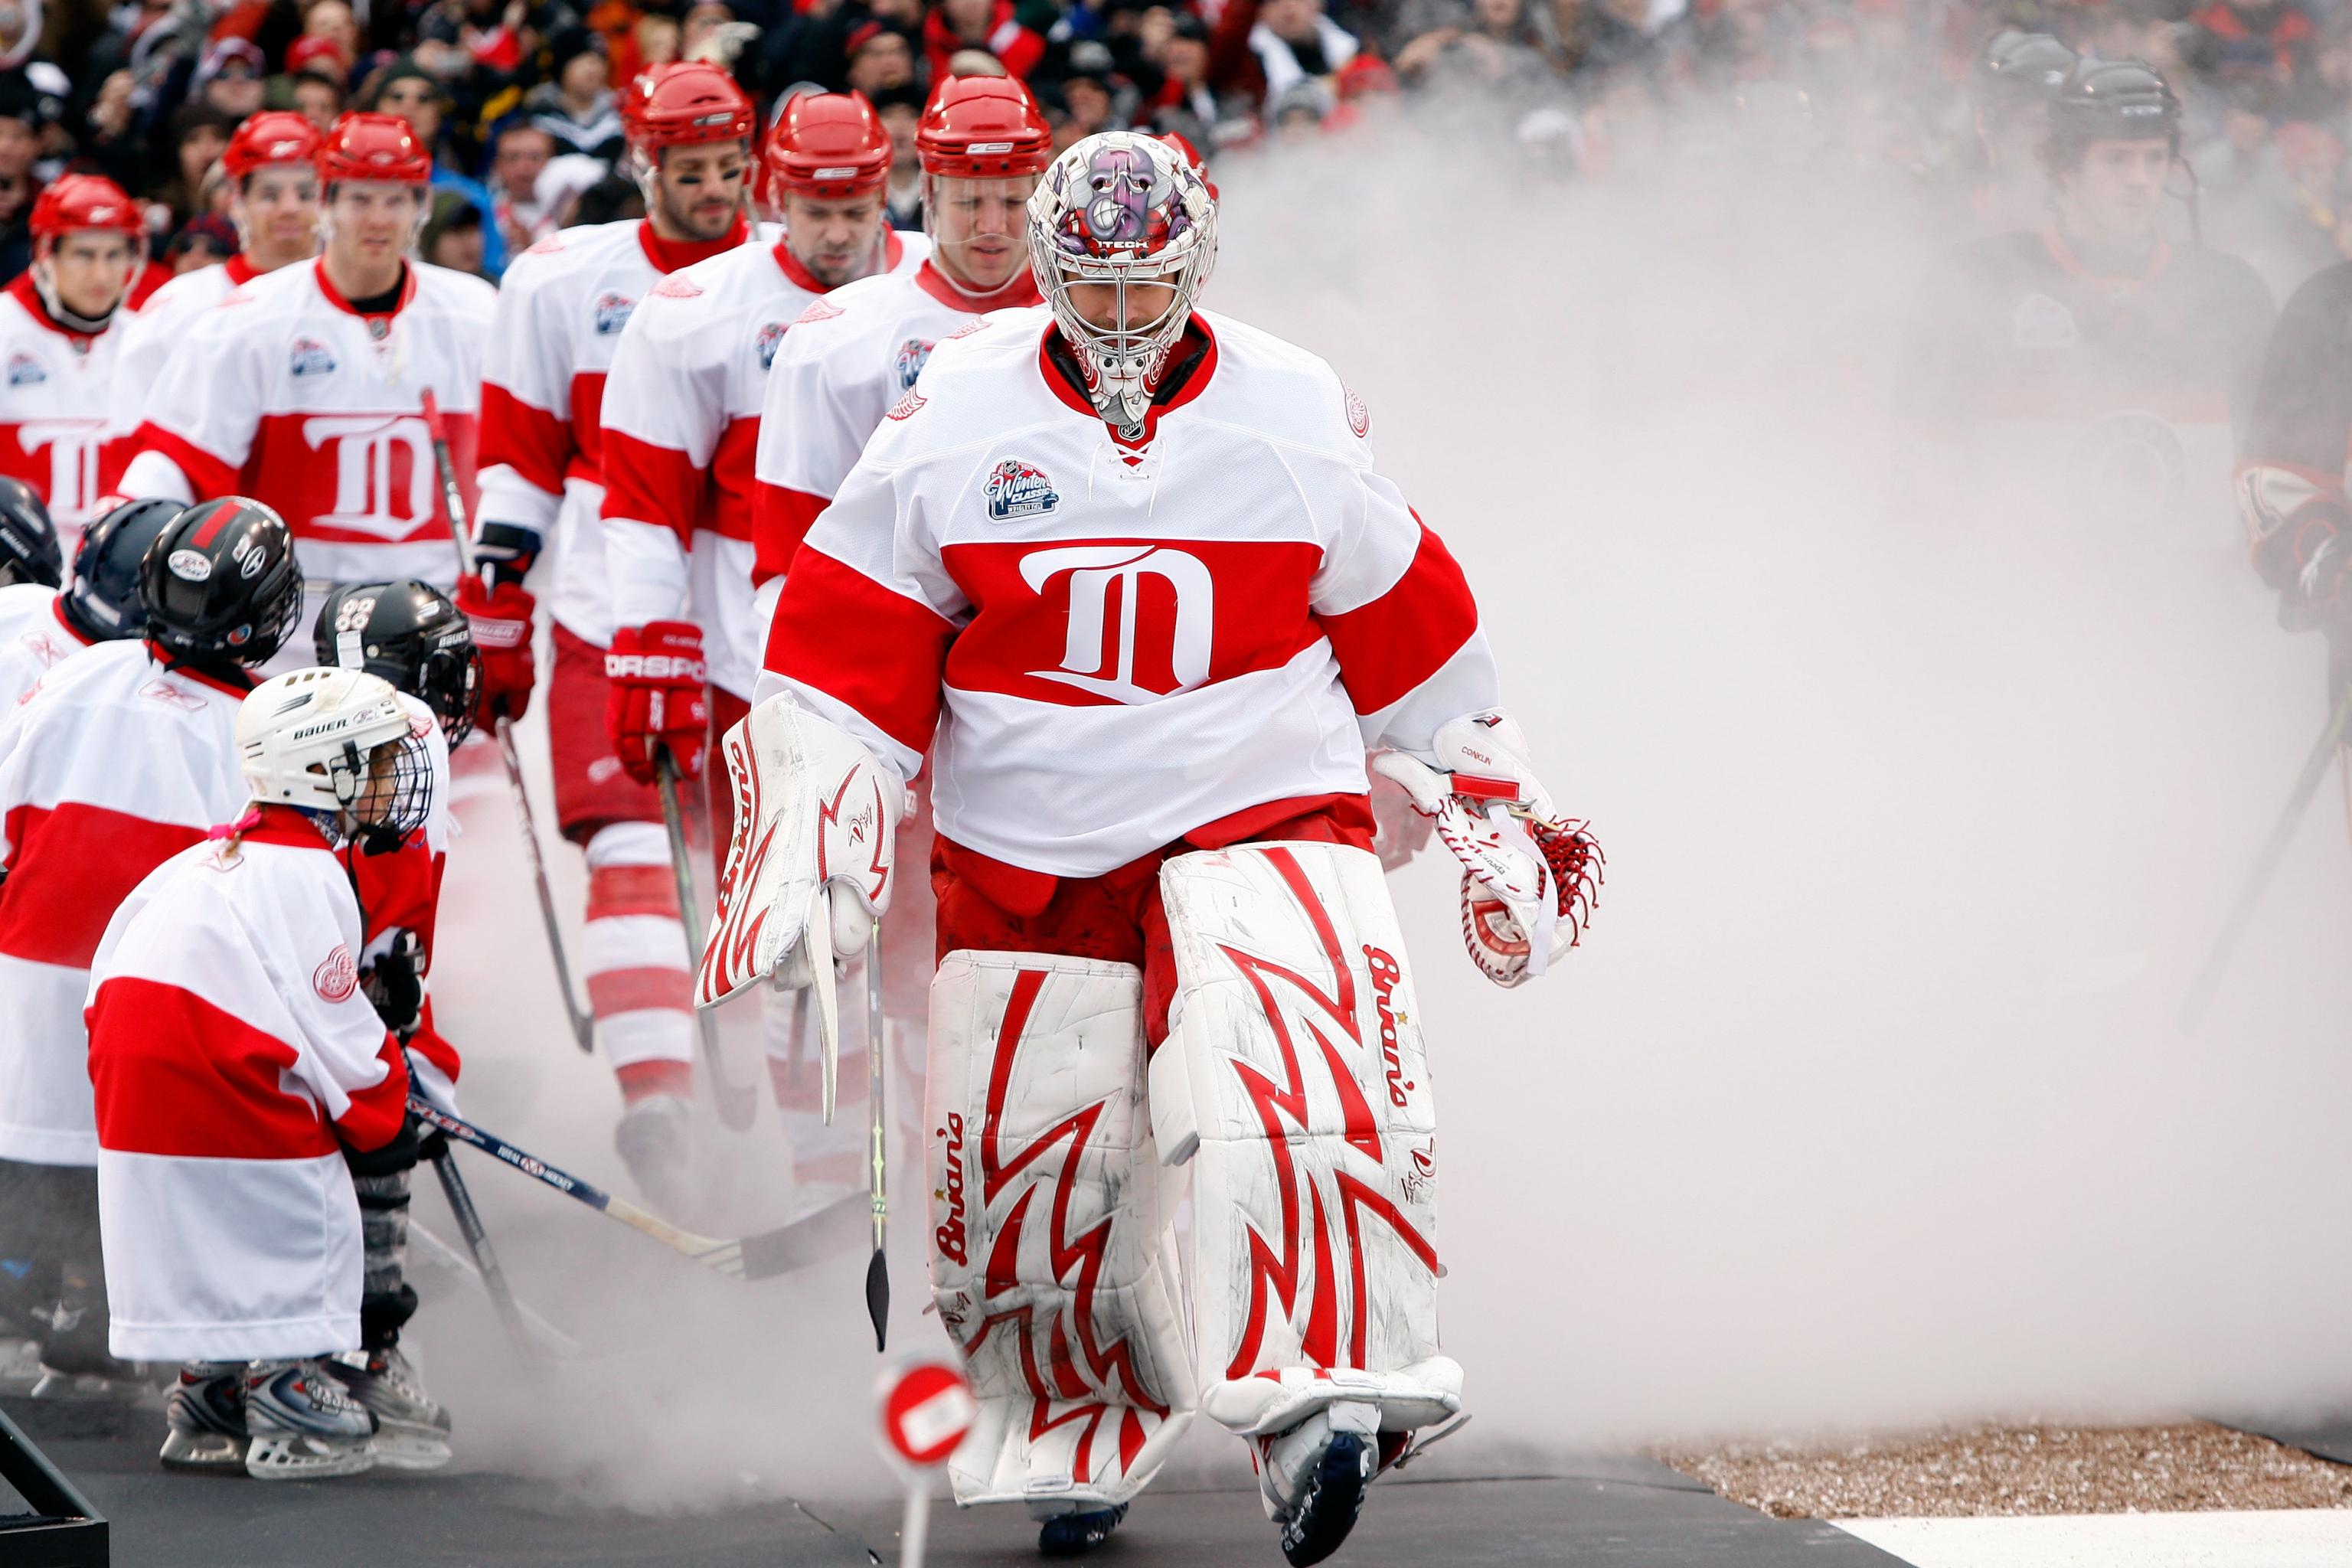 2013 AHL Outdoor Classic: The Photos